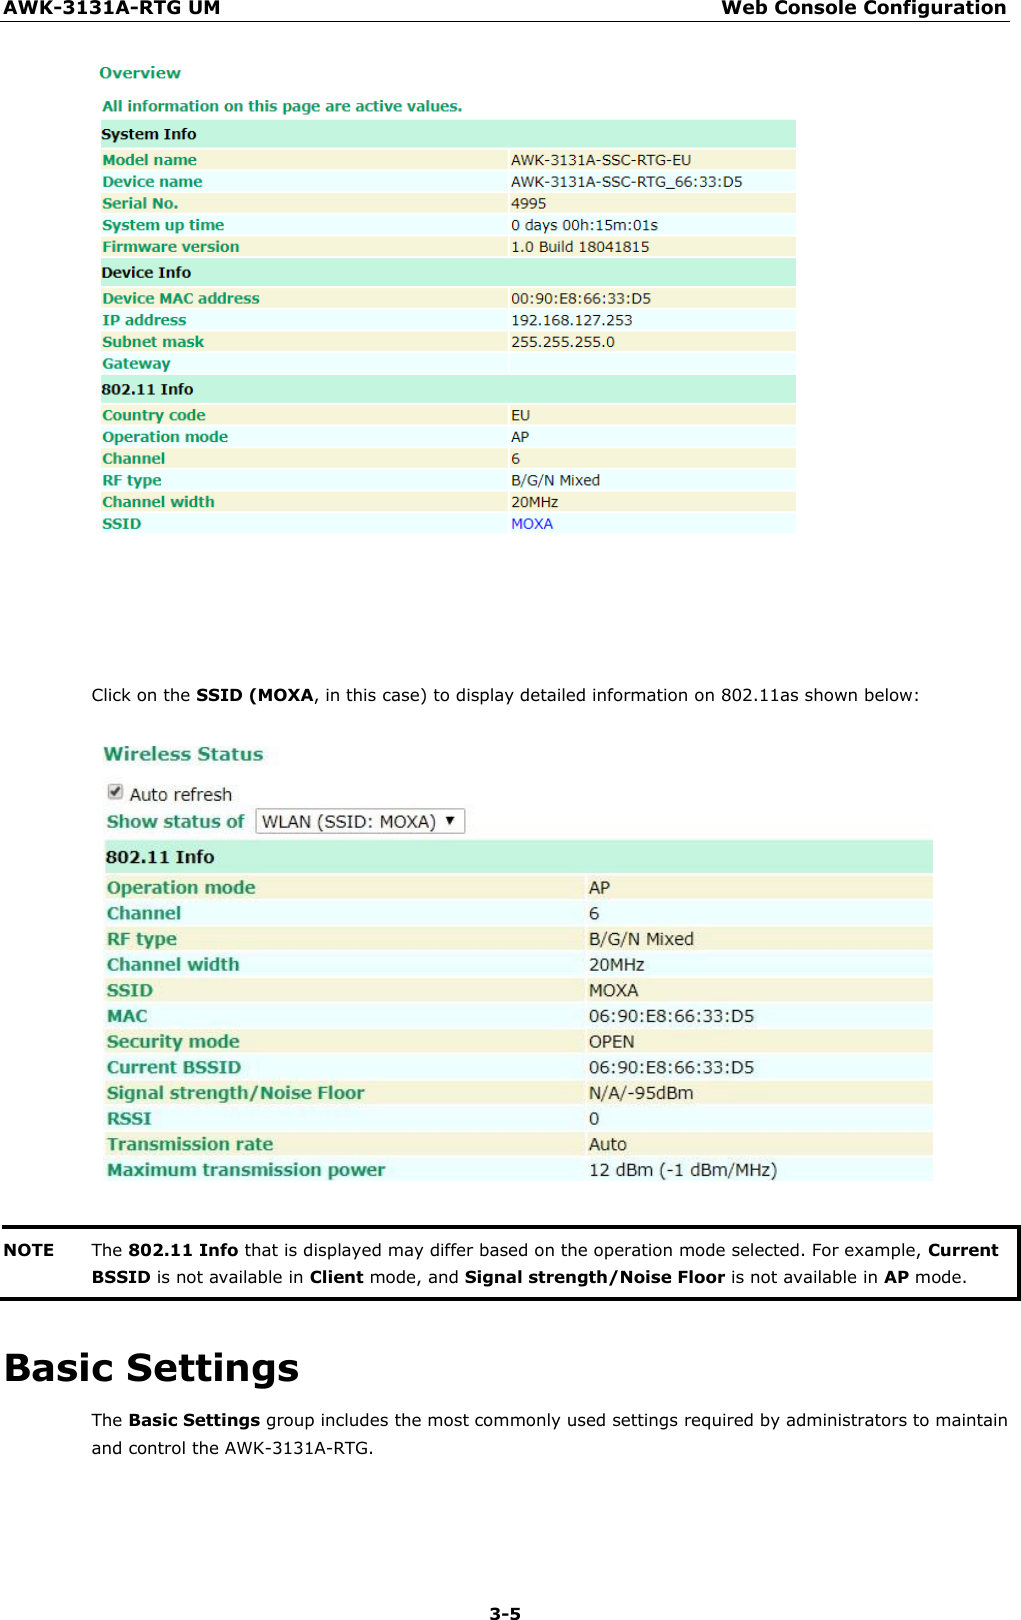 AWK-3131A-RTG UM Web Console Configuration 3-5           Click on the SSID (MOXA, in this case) to display detailed information on 802.11as shown below:     NOTE The 802.11 Info that is displayed may differ based on the operation mode selected. For example, Current BSSID is not available in Client mode, and Signal strength/Noise Floor is not available in AP mode.  Basic Settings The Basic Settings group includes the most commonly used settings required by administrators to maintain and control the AWK-3131A-RTG. 